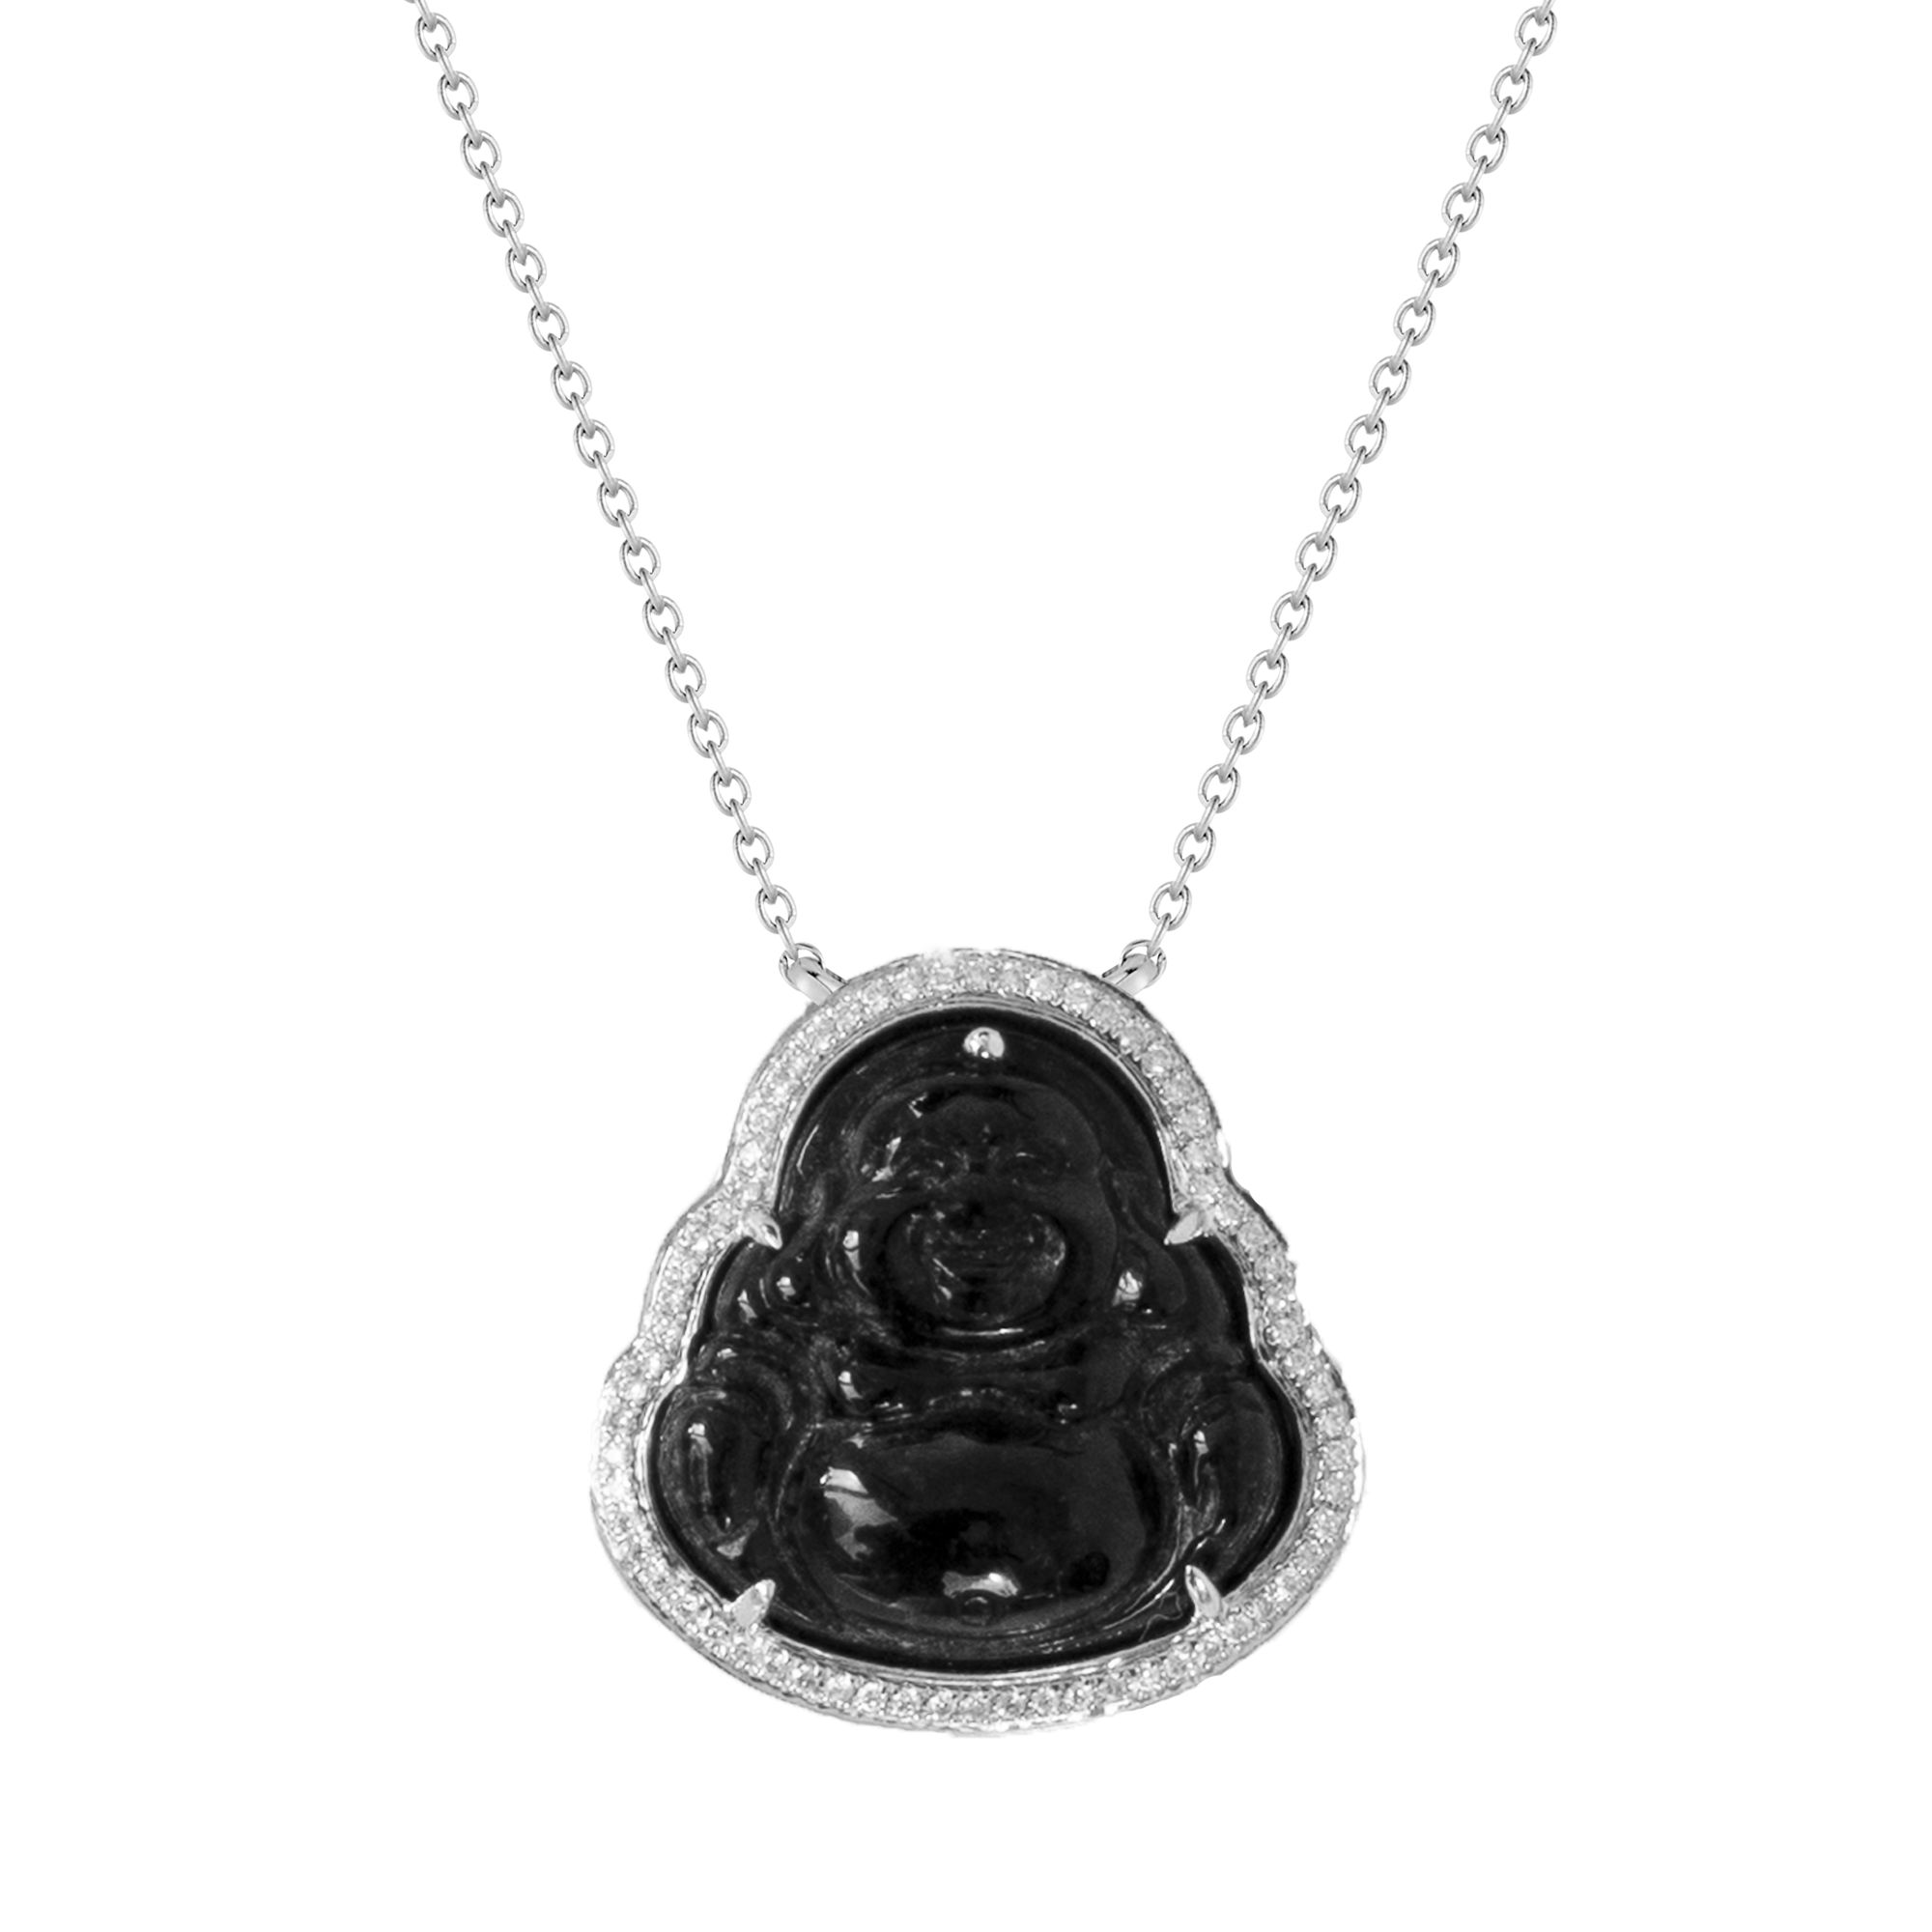 Buy Buddha Necklace Double Sided Buddhism Pendant Black Leather Cord 20  Online in India - Etsy